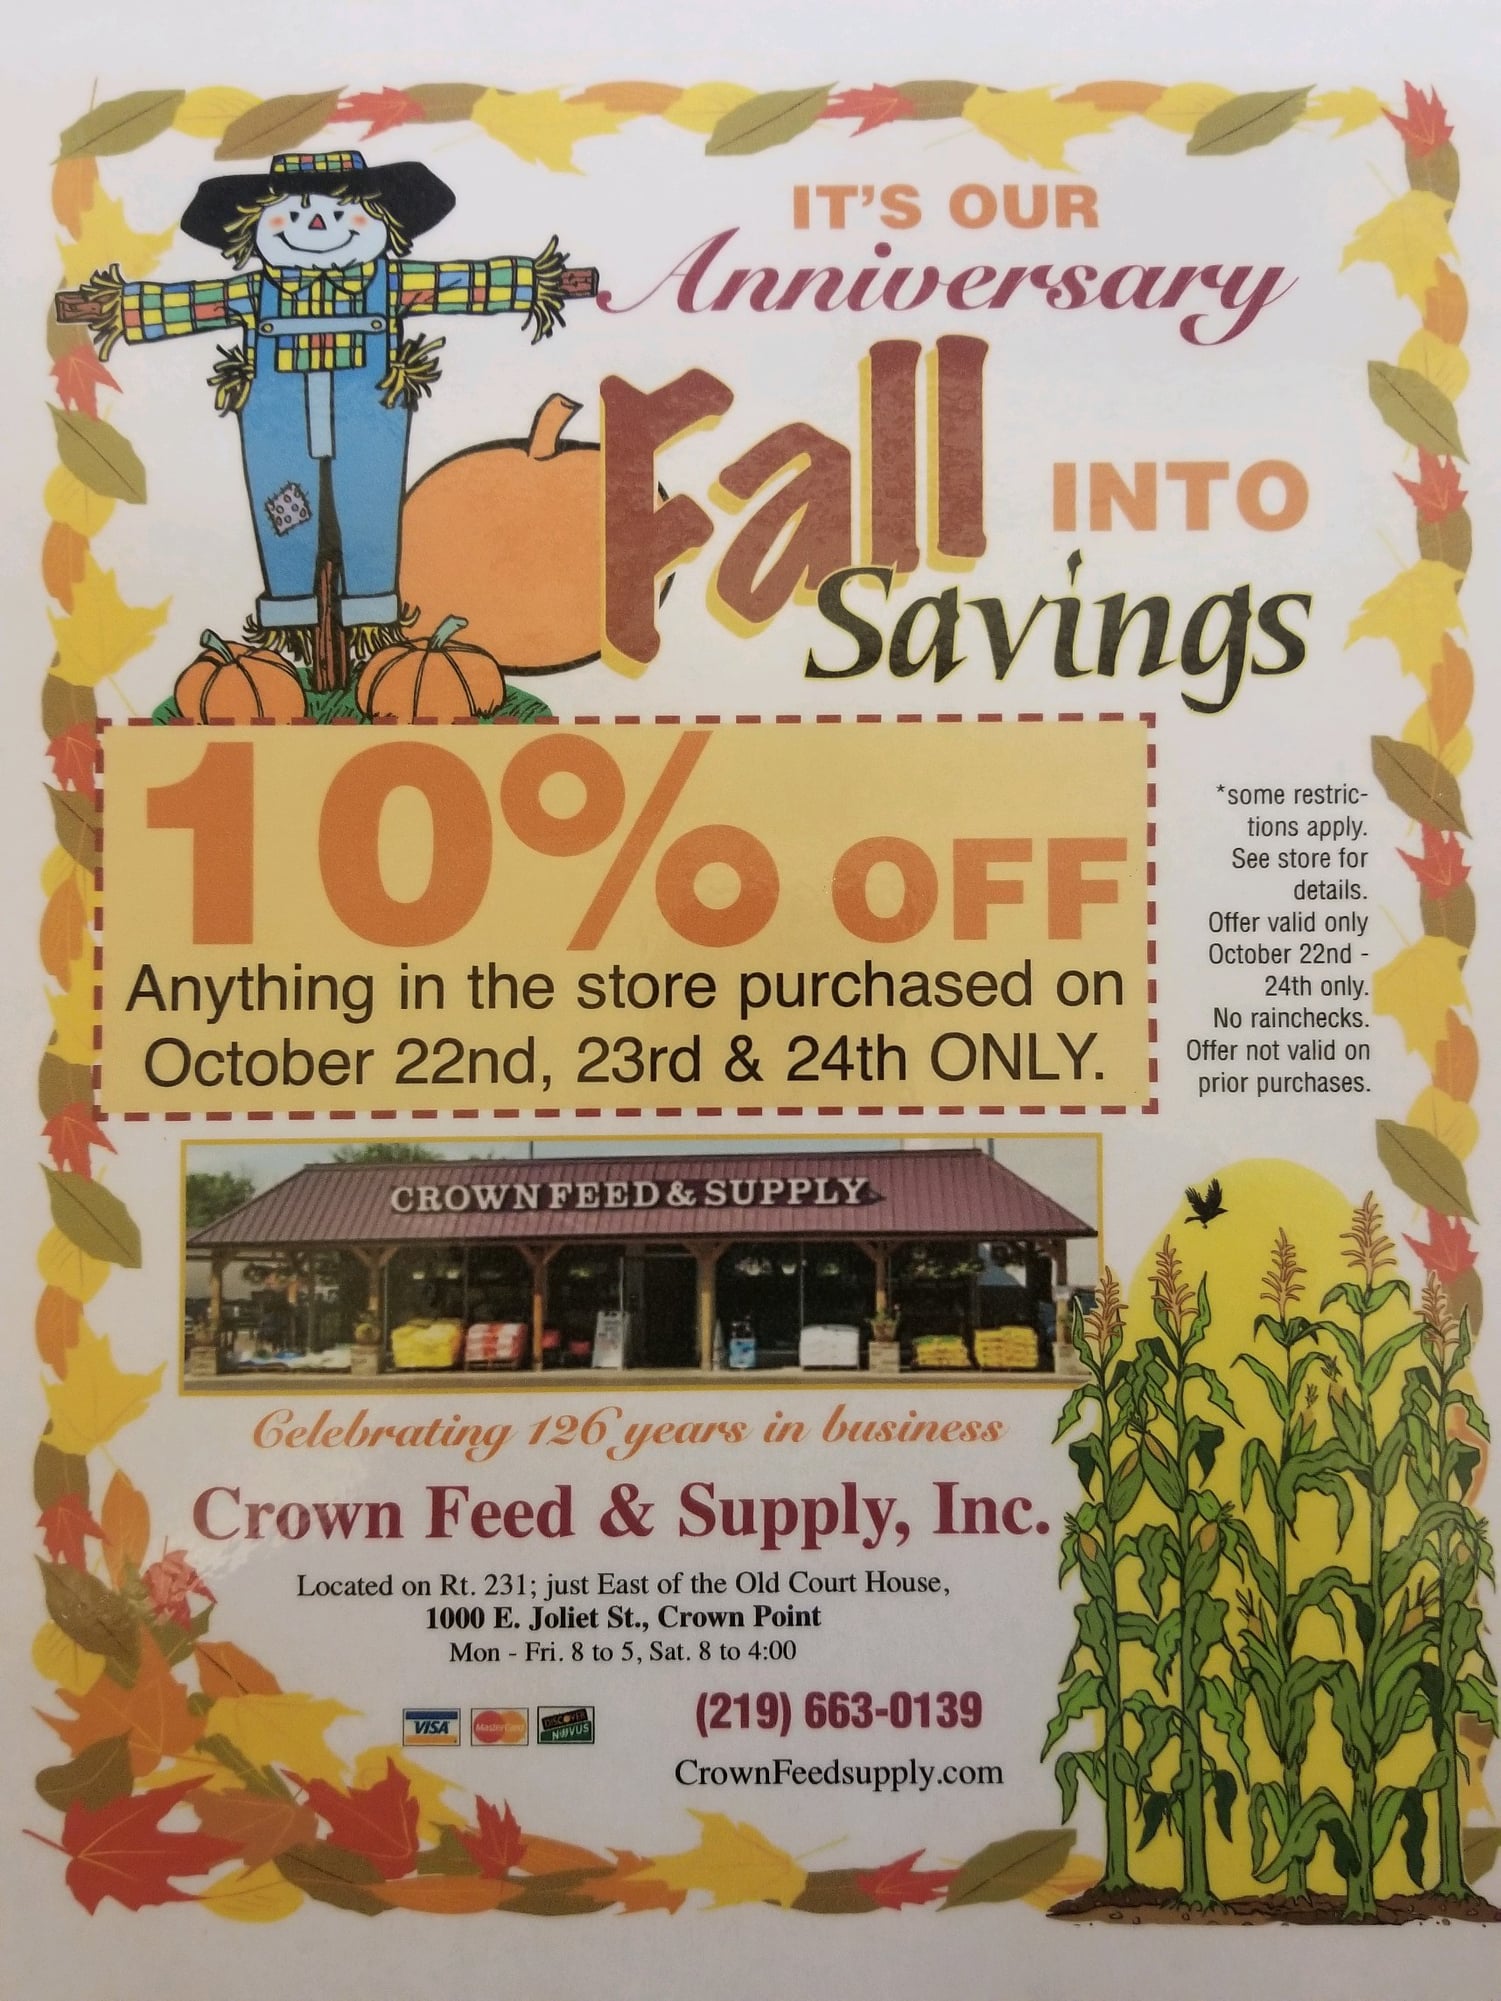 Crown Feed & Supply